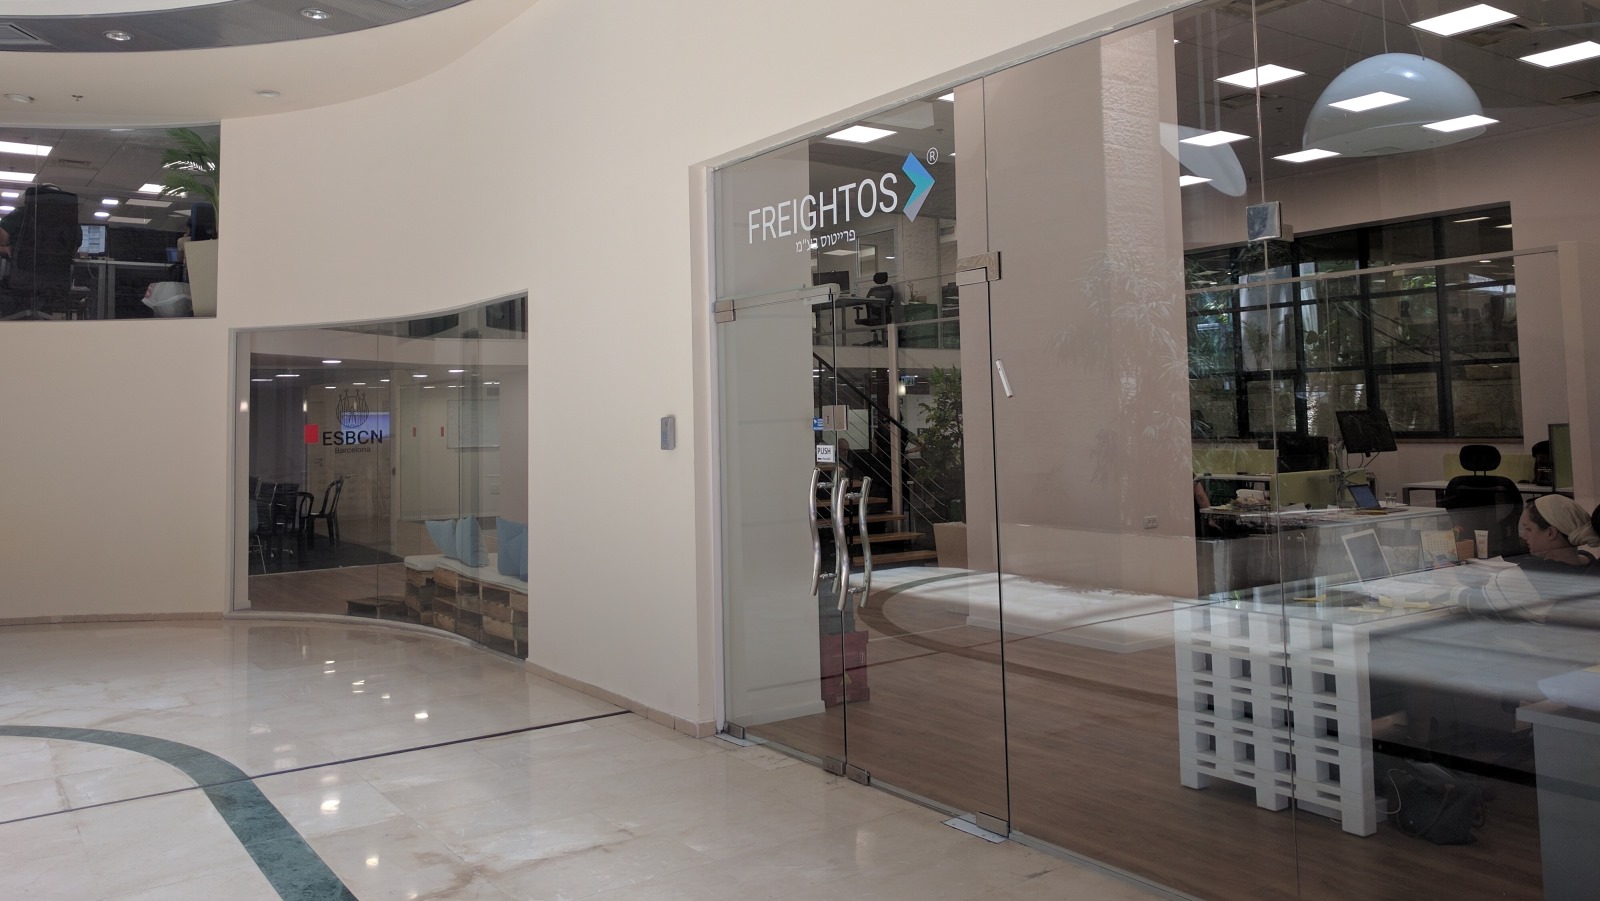 The Freightos office in Jerusalem. Photo: courtesy